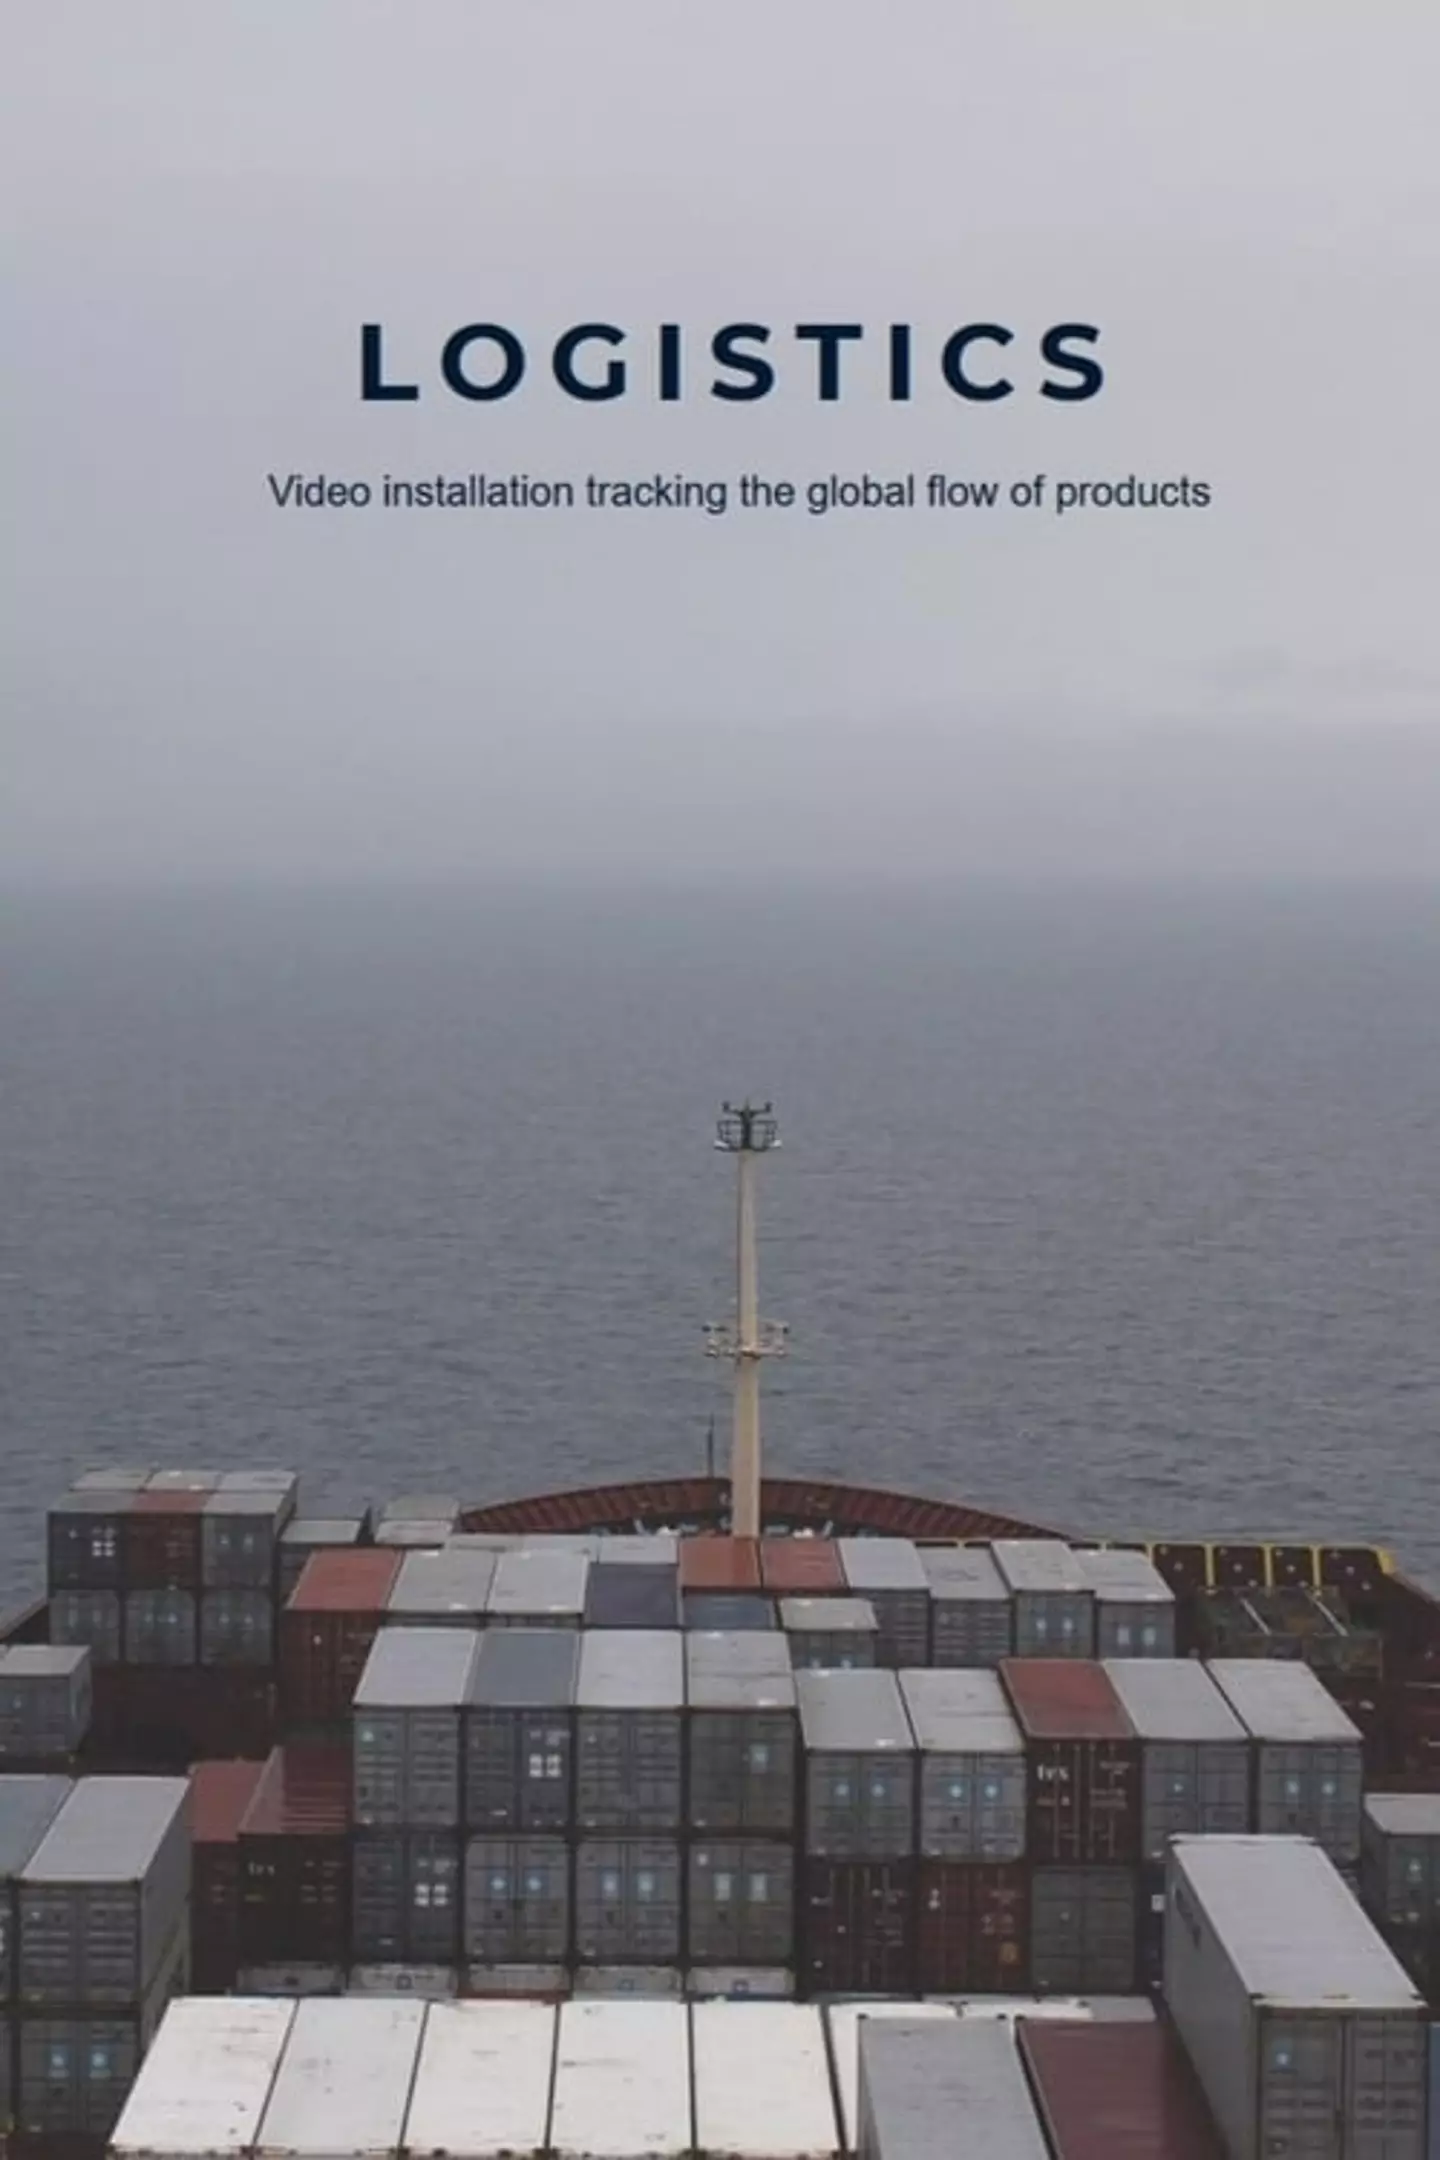 Logistics, an 'experimental film', premiered in 2008.